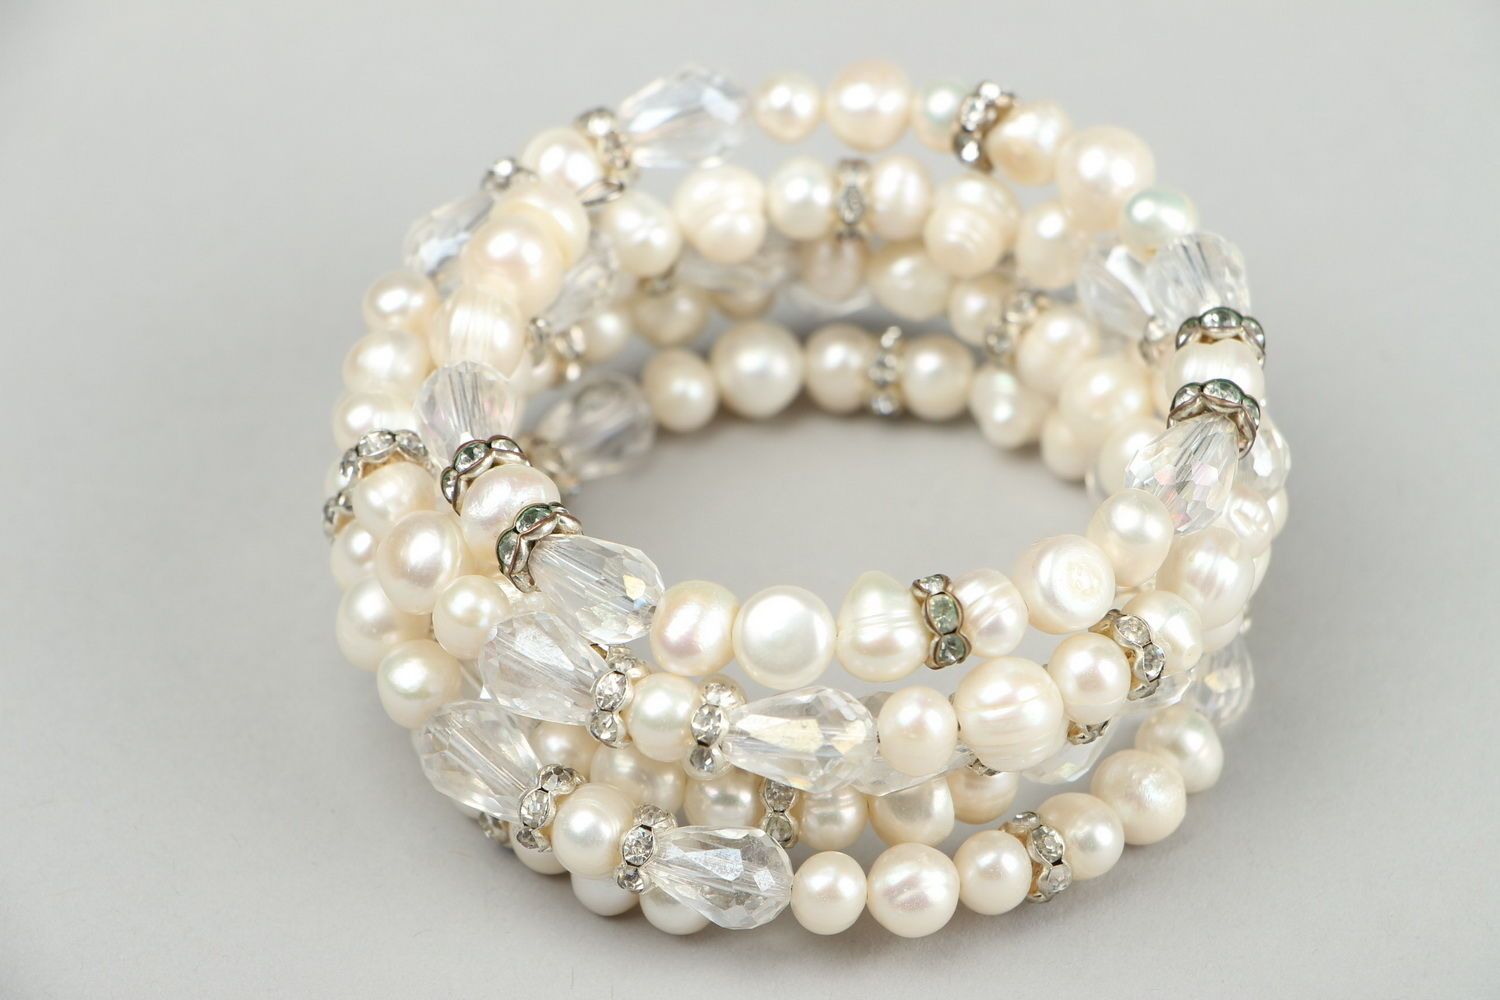 Handmade bracelet made of pearls and Czech crystal photo 4